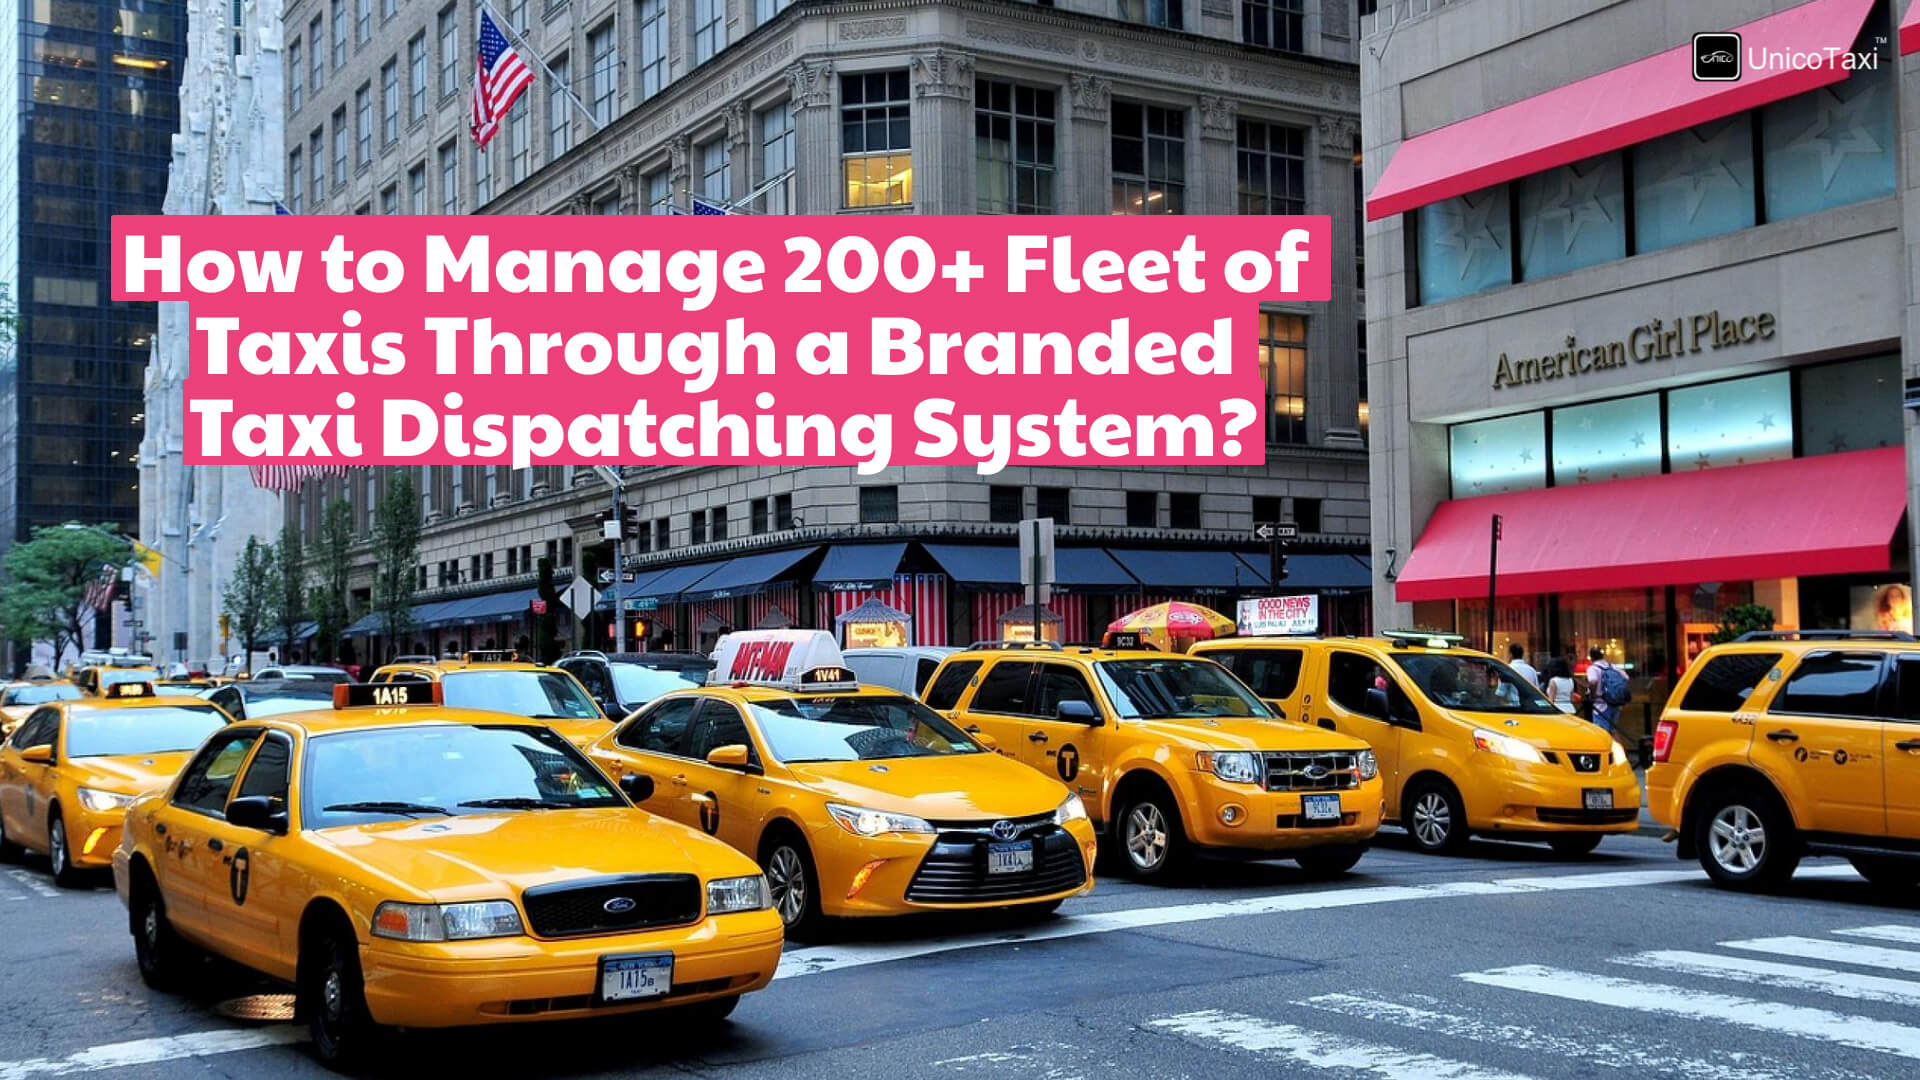 How to Manage 200+ Fleet of Taxis Through a Branded Taxi Dispatching System?